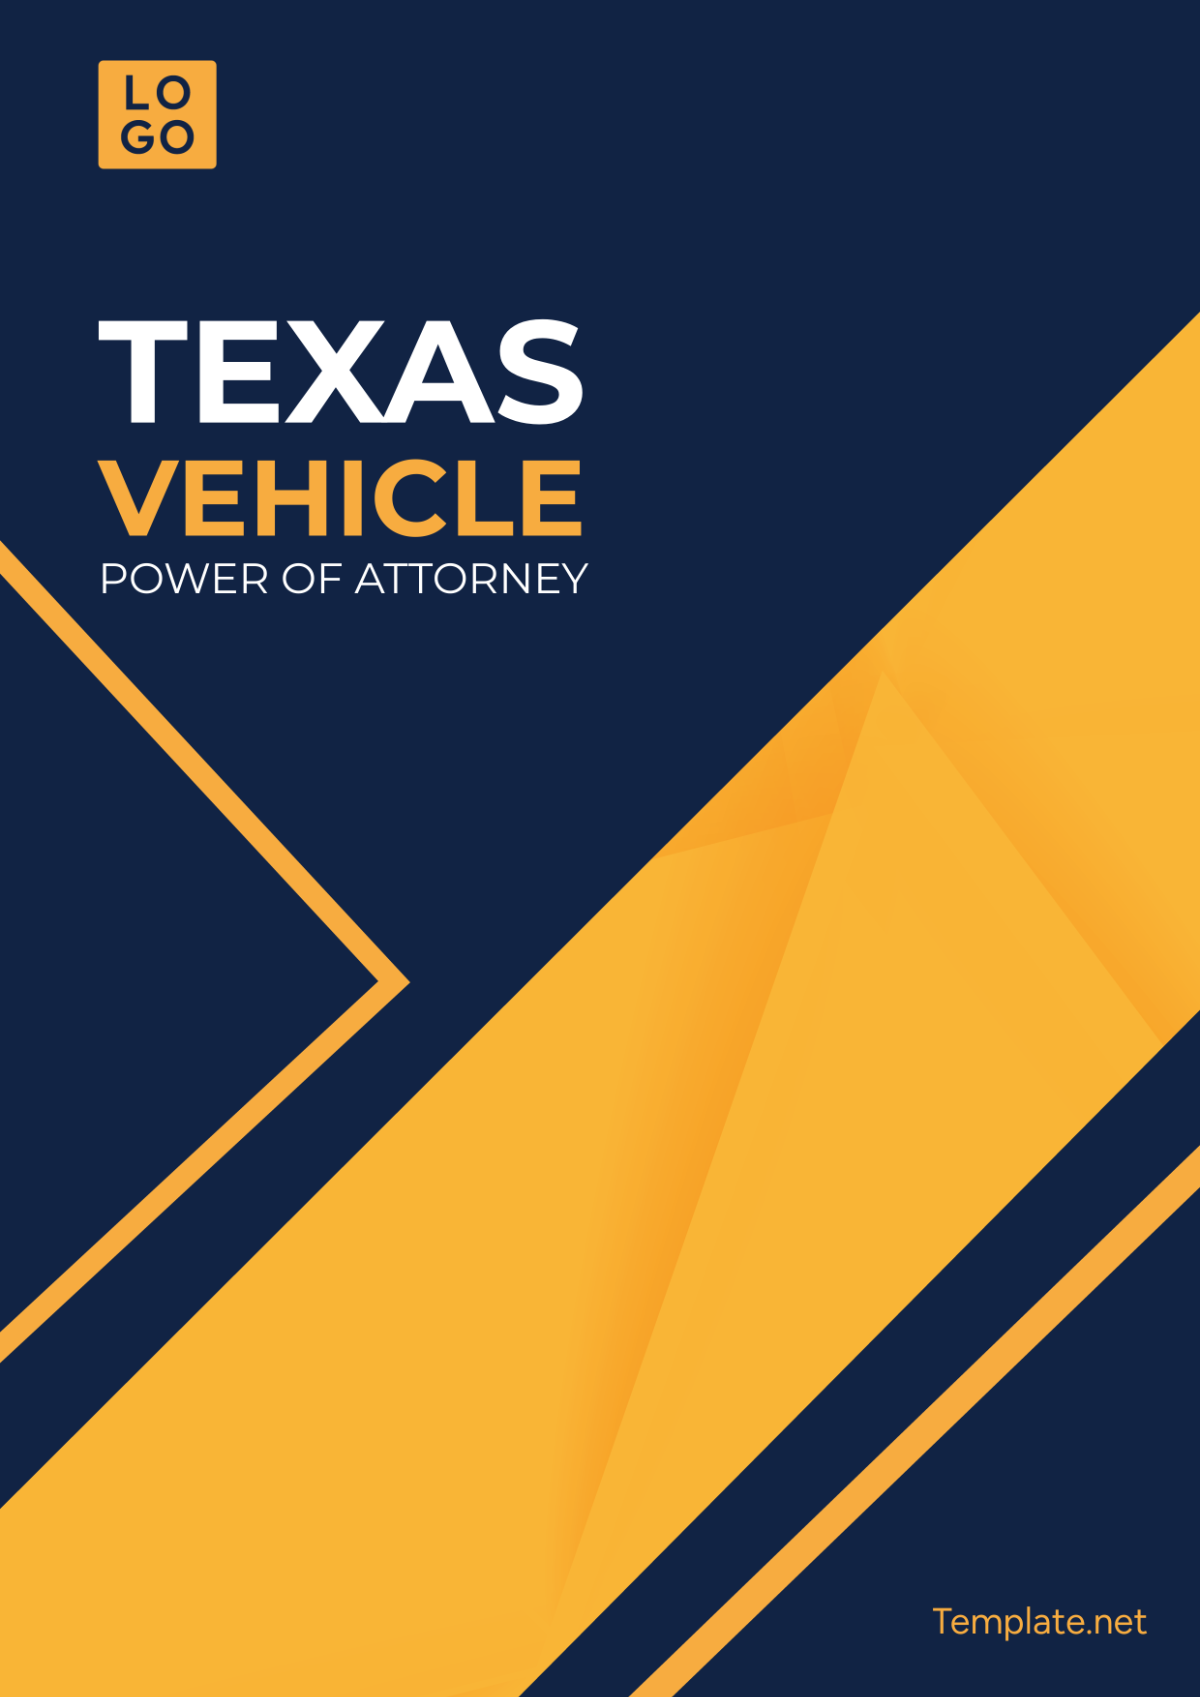 Texas Vehicle Power of Attorney Template